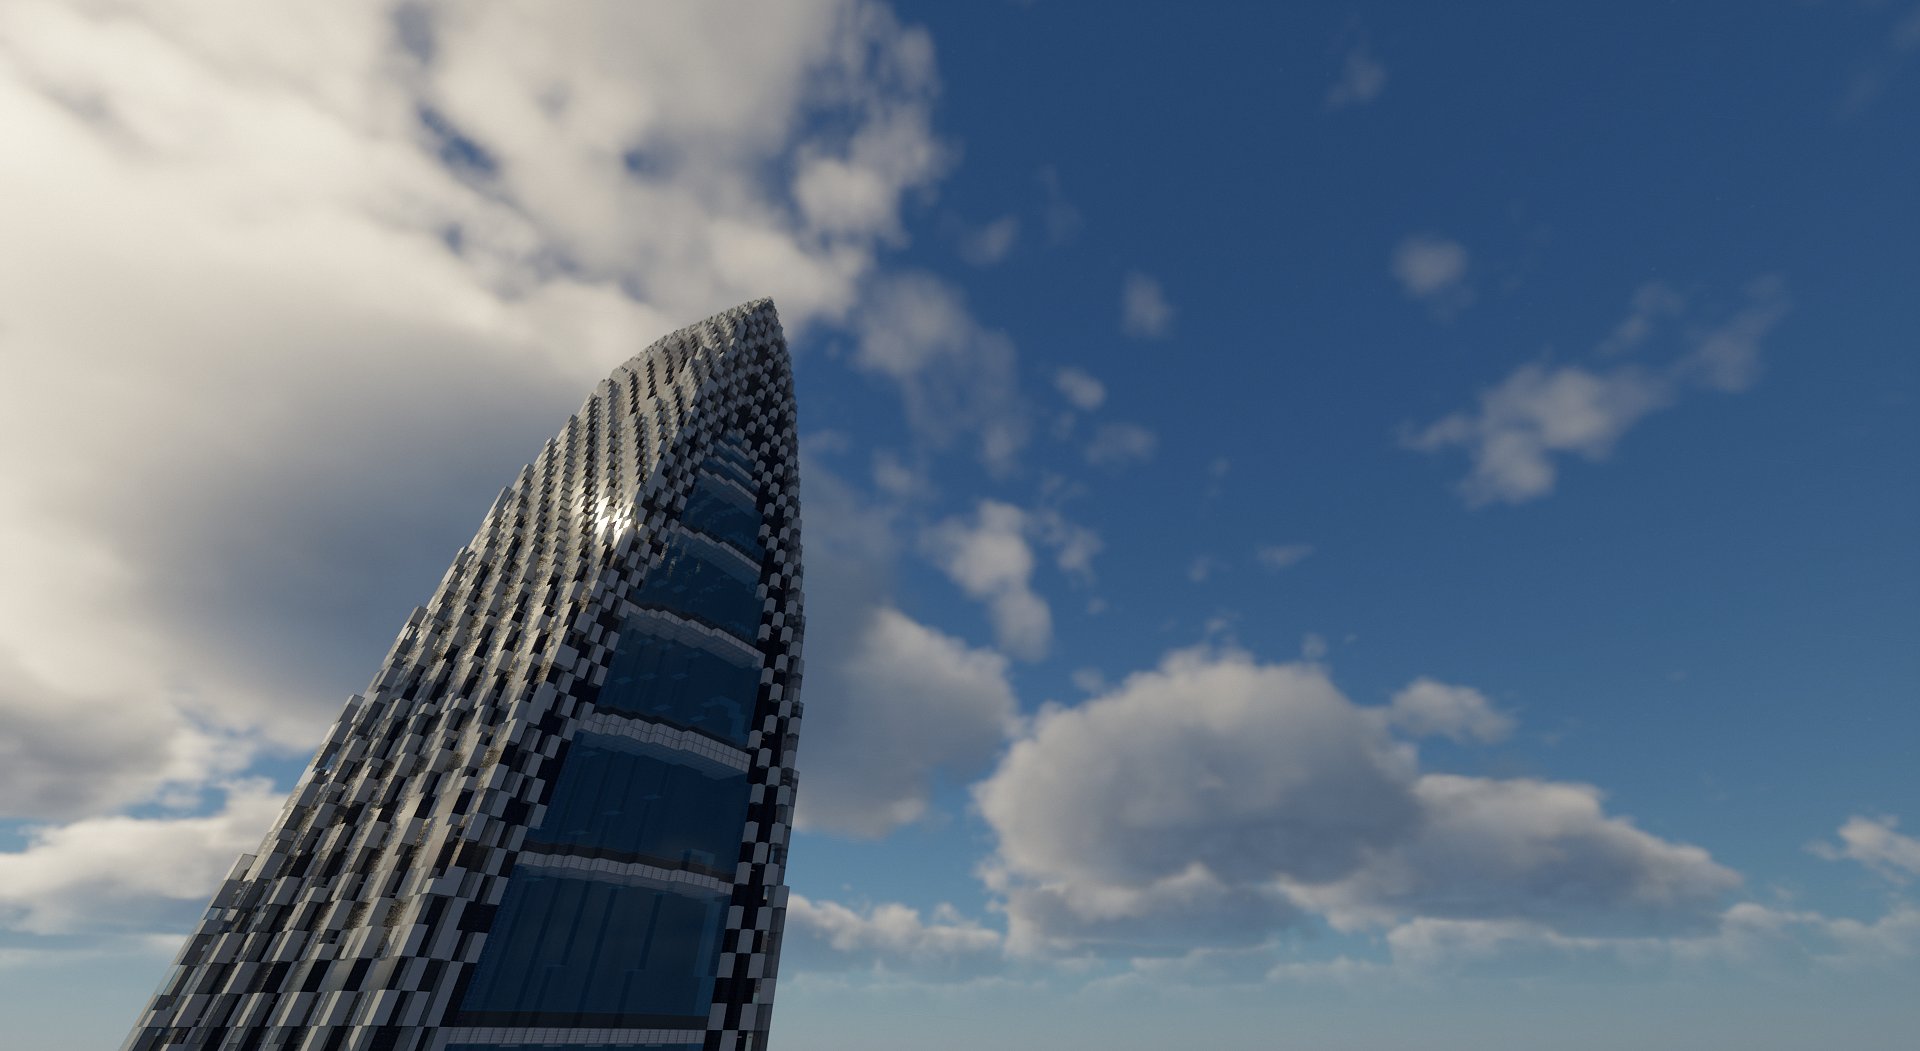 Build The Earth Japan Nishi Shinjuku In Minecraft We Are Currently Looking For More Builders No Experience Needed T Co Ng6sdgg5eg Minecraft Minecraft建築コミュ Minecraftbuilds Minecraftbuild Tokyo Architecture T